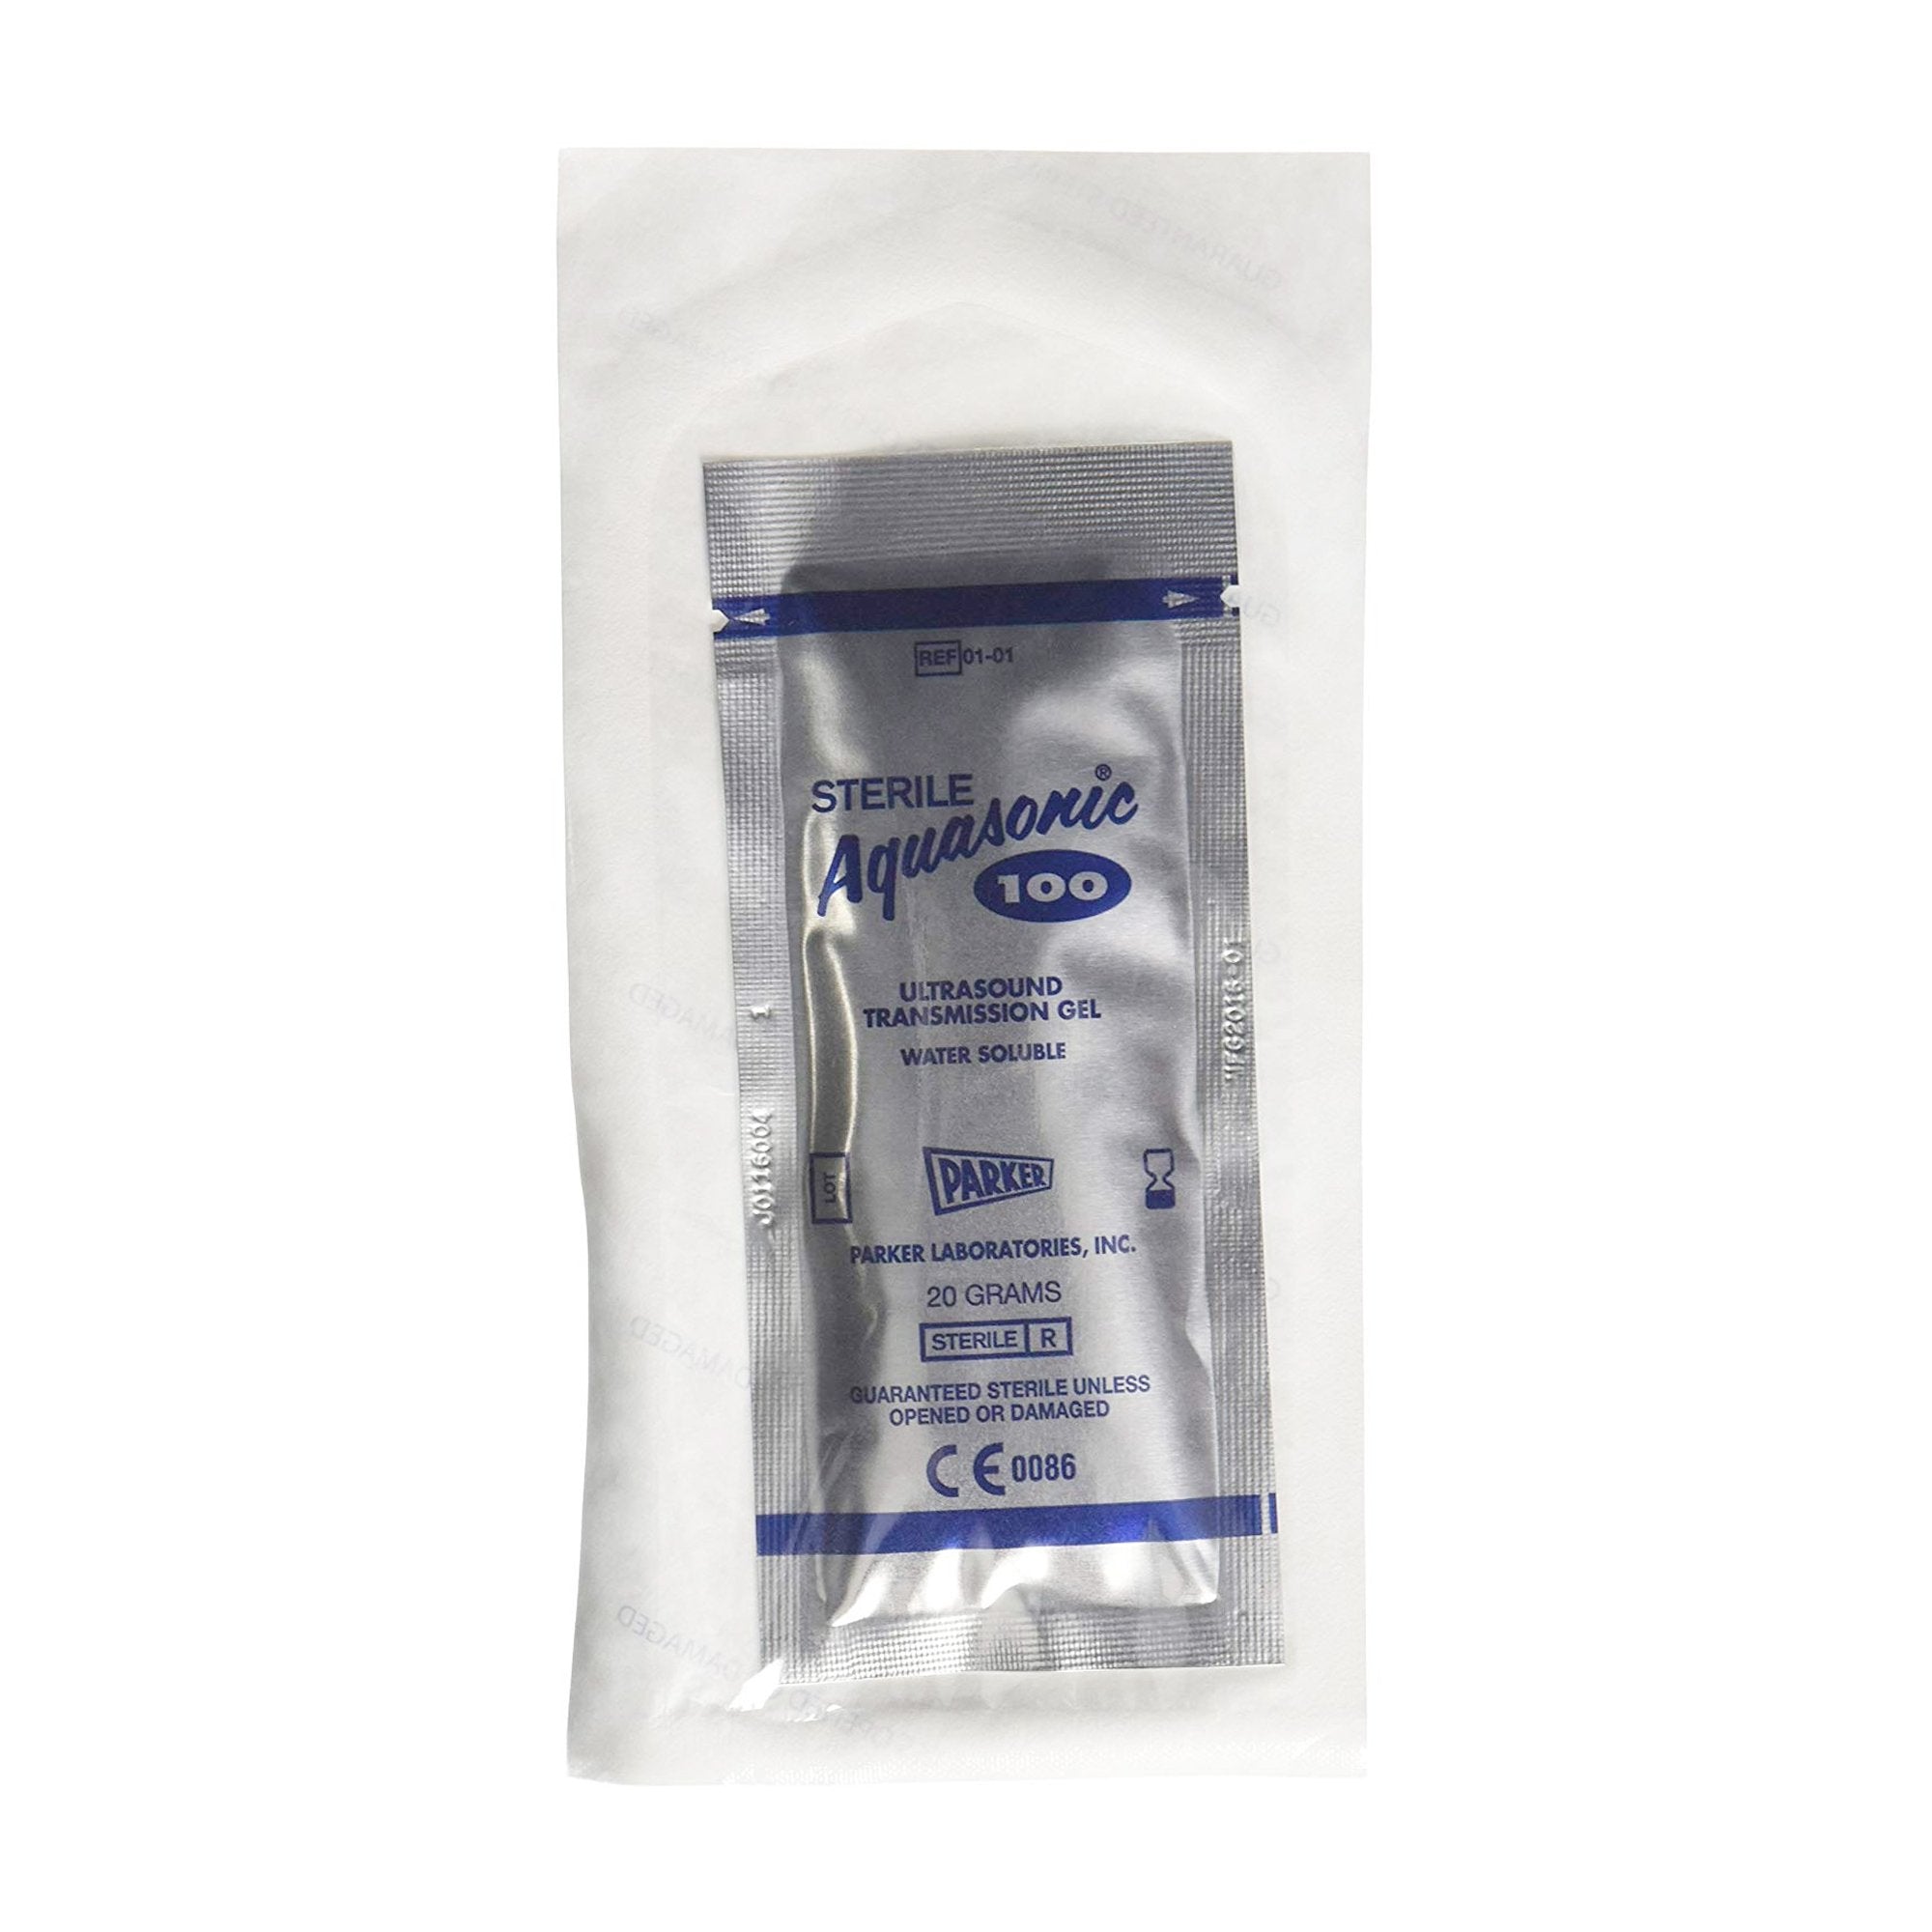 PARKER 01-01 Sterile Aquasonic100 Ultrasound Transmission Gel 20 g overwrapped foil pouches (box of 48)